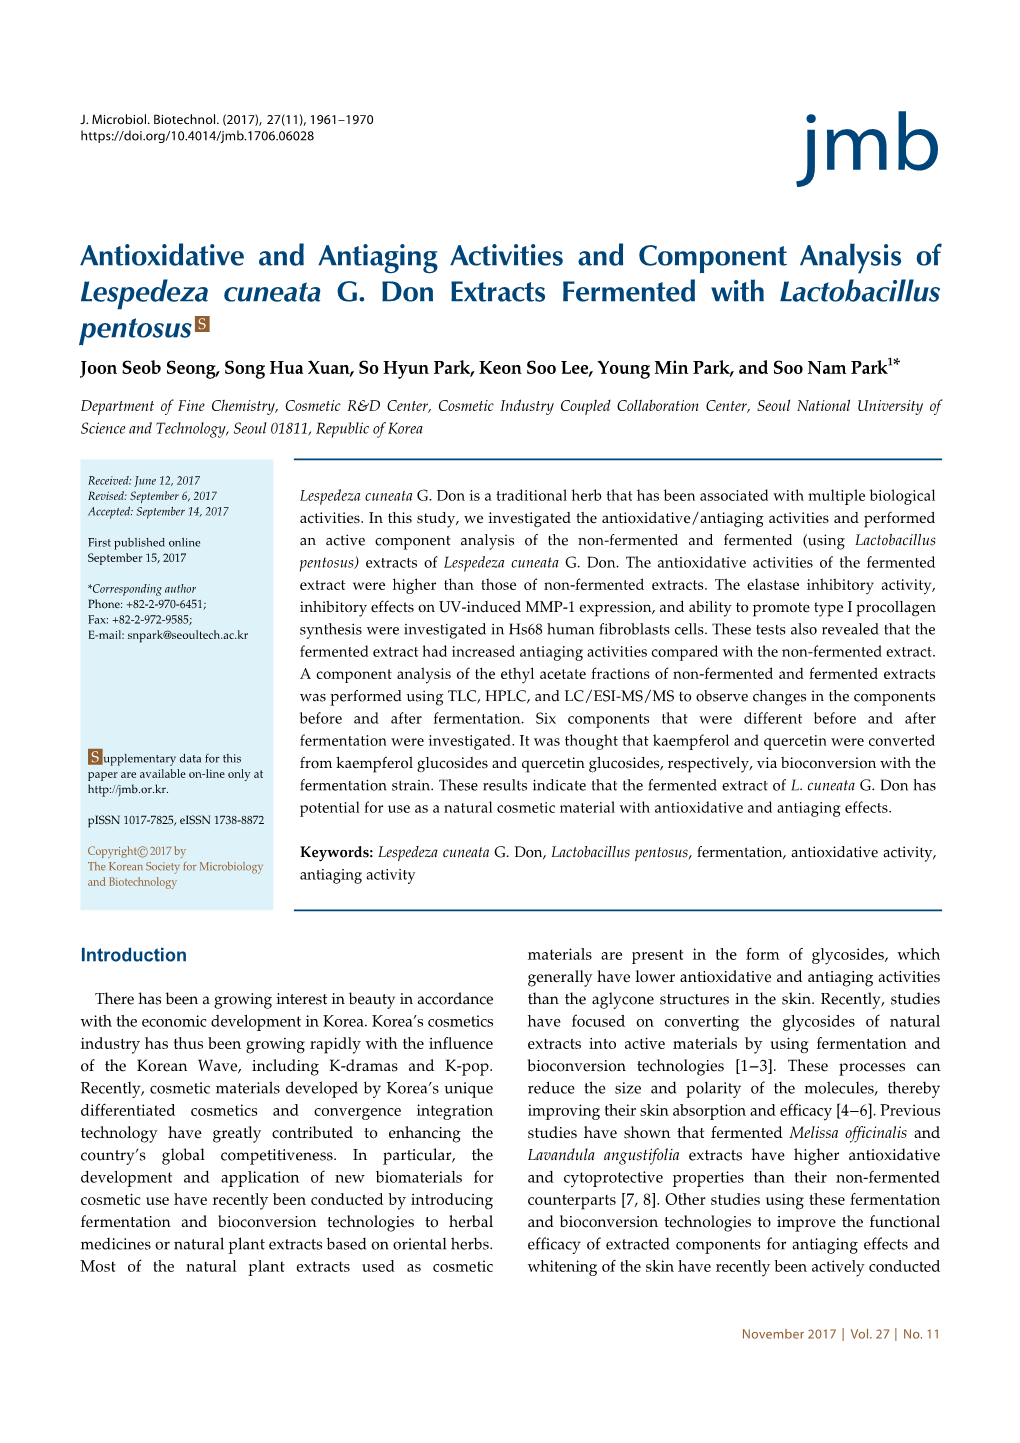 Antioxidative and Antiaging Activities and Component Analysis of Lespedeza Cuneata G